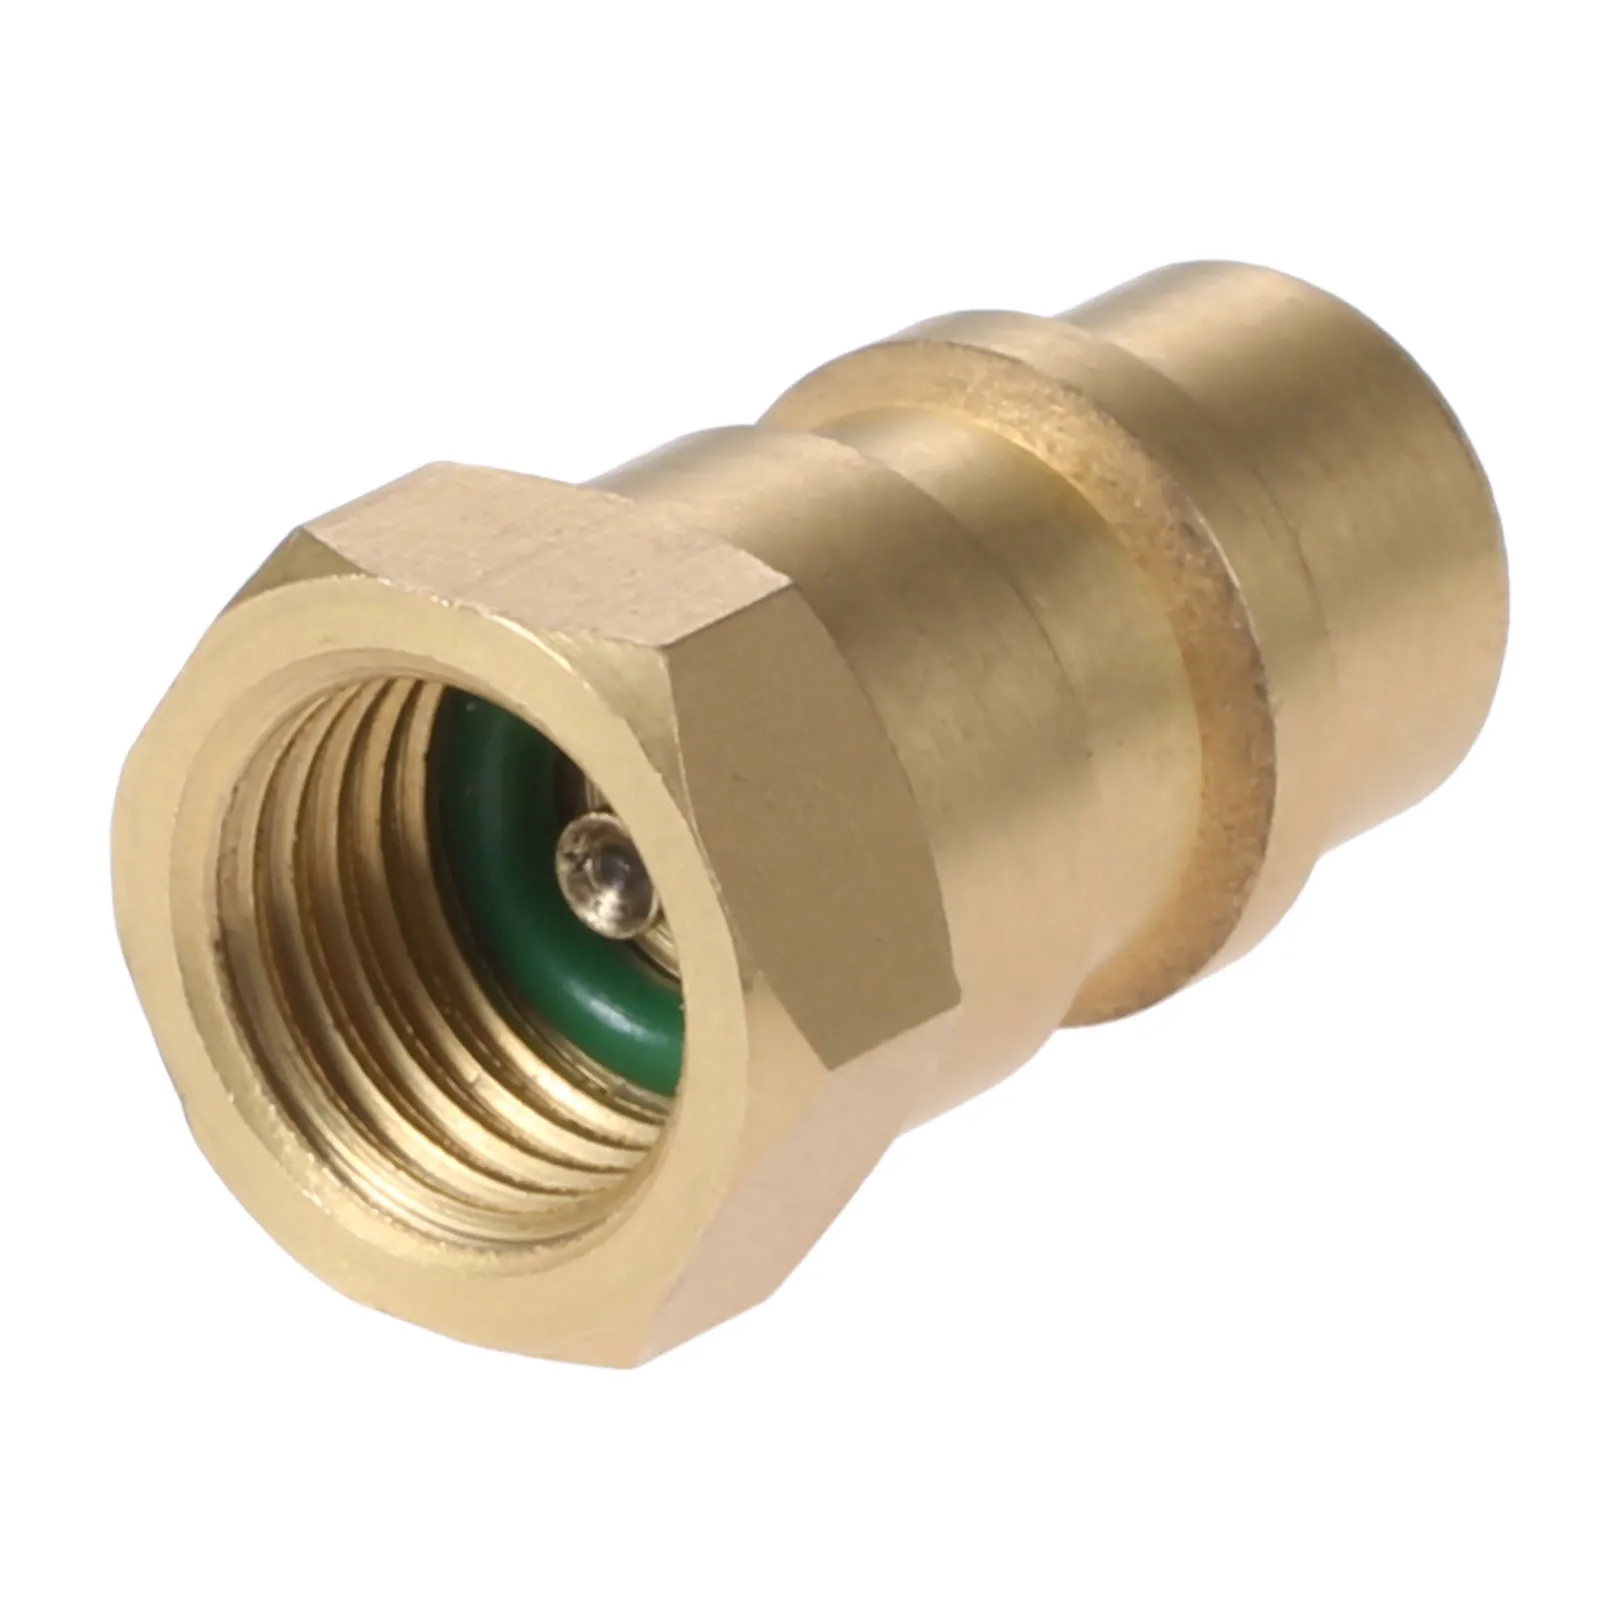 1Pc R12 R22 R502 Screw To R134A Fast Conversion Adapter Valve 1/4'' SAE To 8v1 Thread Brass Car Air-conditioning Installation